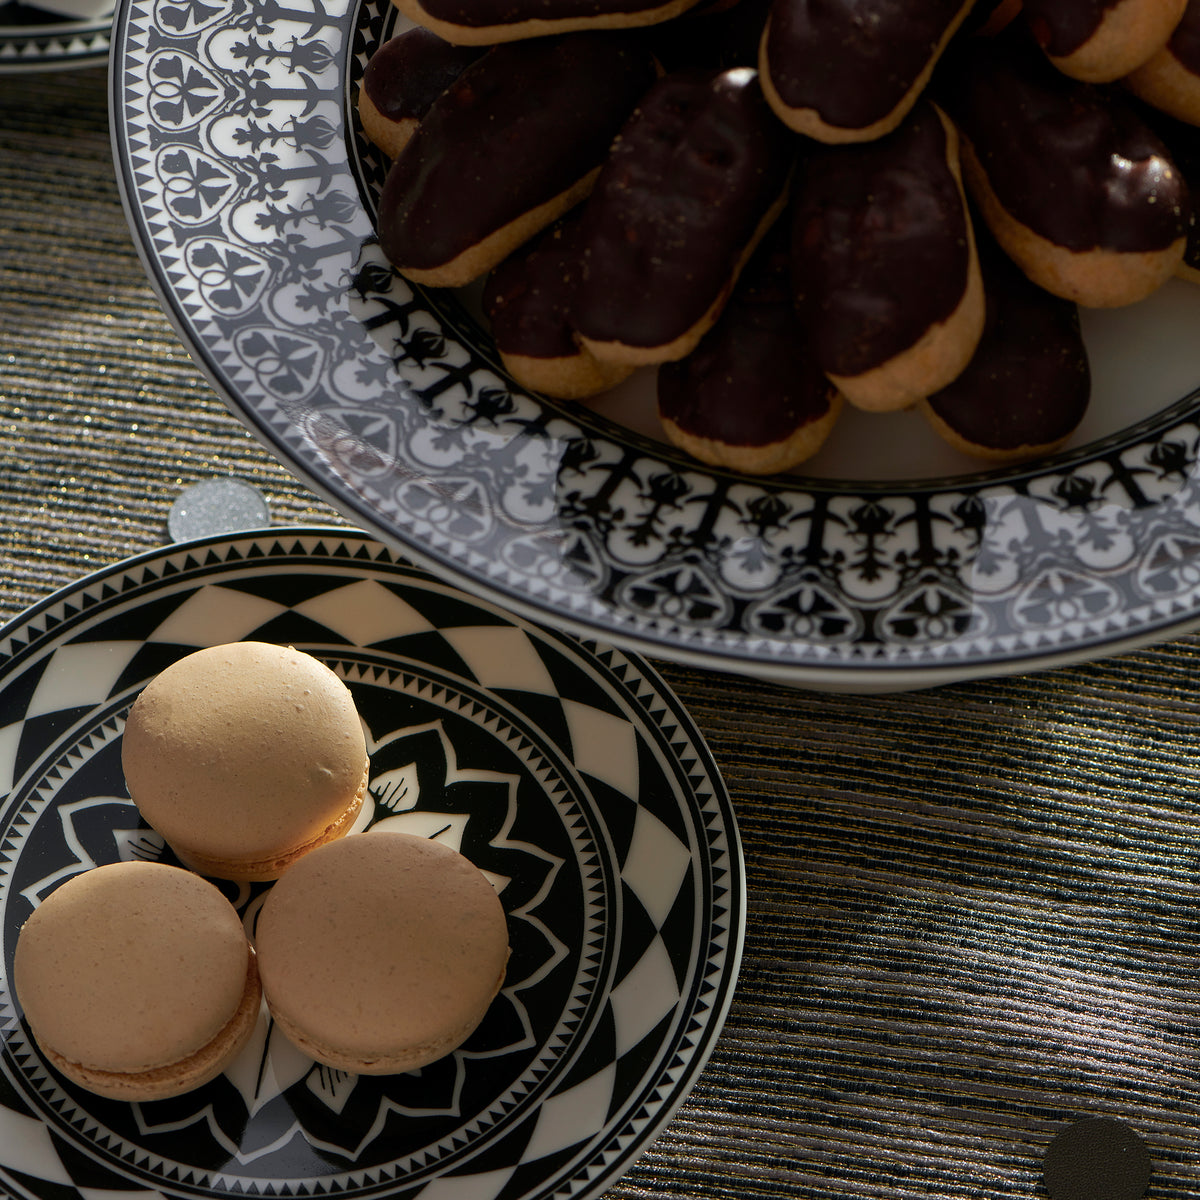 A set of Fez Canapé Plates on a table in Morocco by Caskata Artisanal Home.